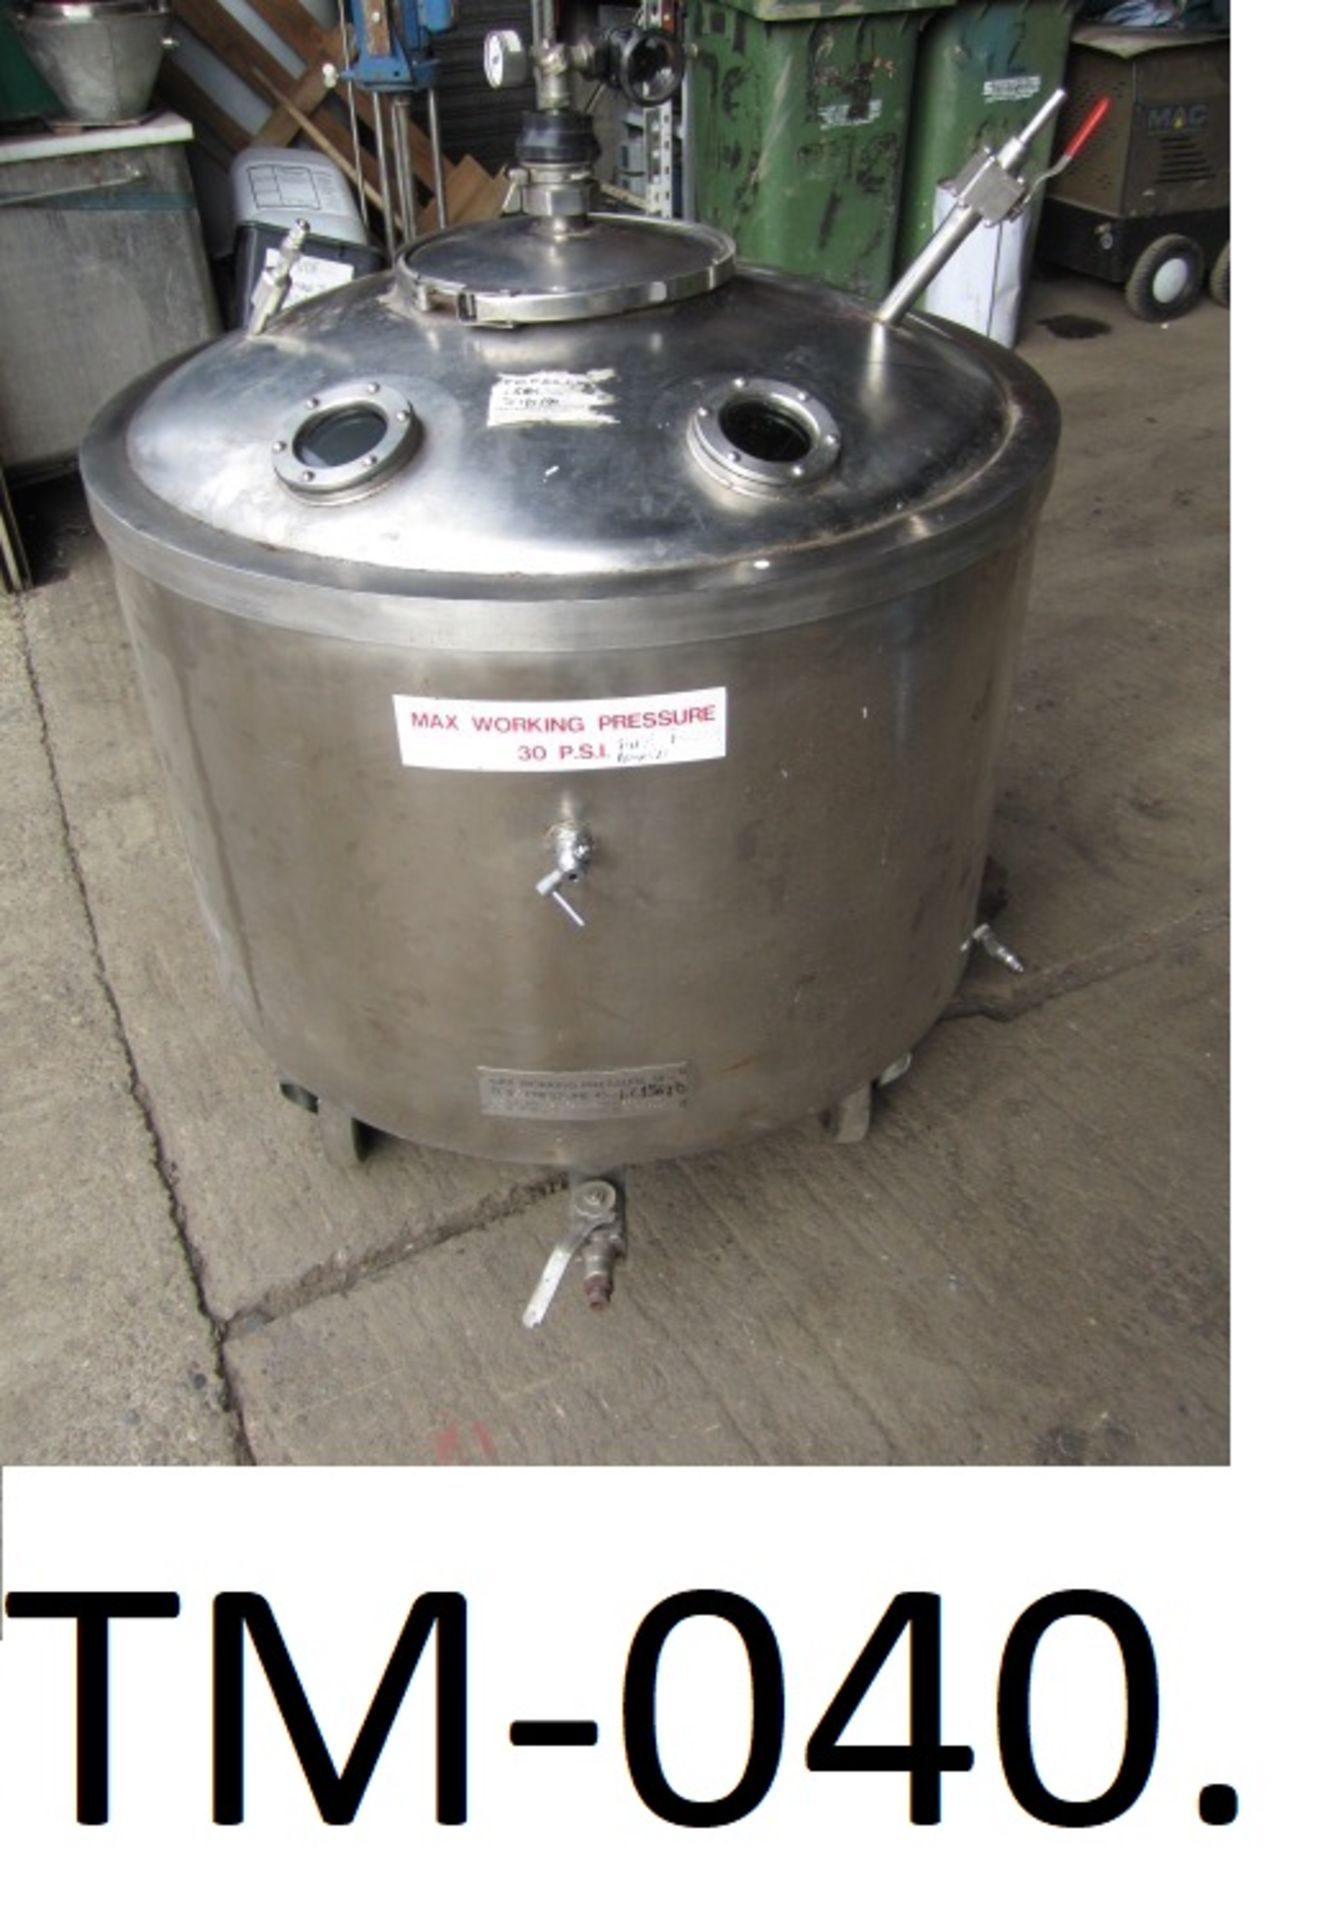 Grundy 250L Stainless Steel Pressure Vessel. with insulated cooling coils attached to the outside